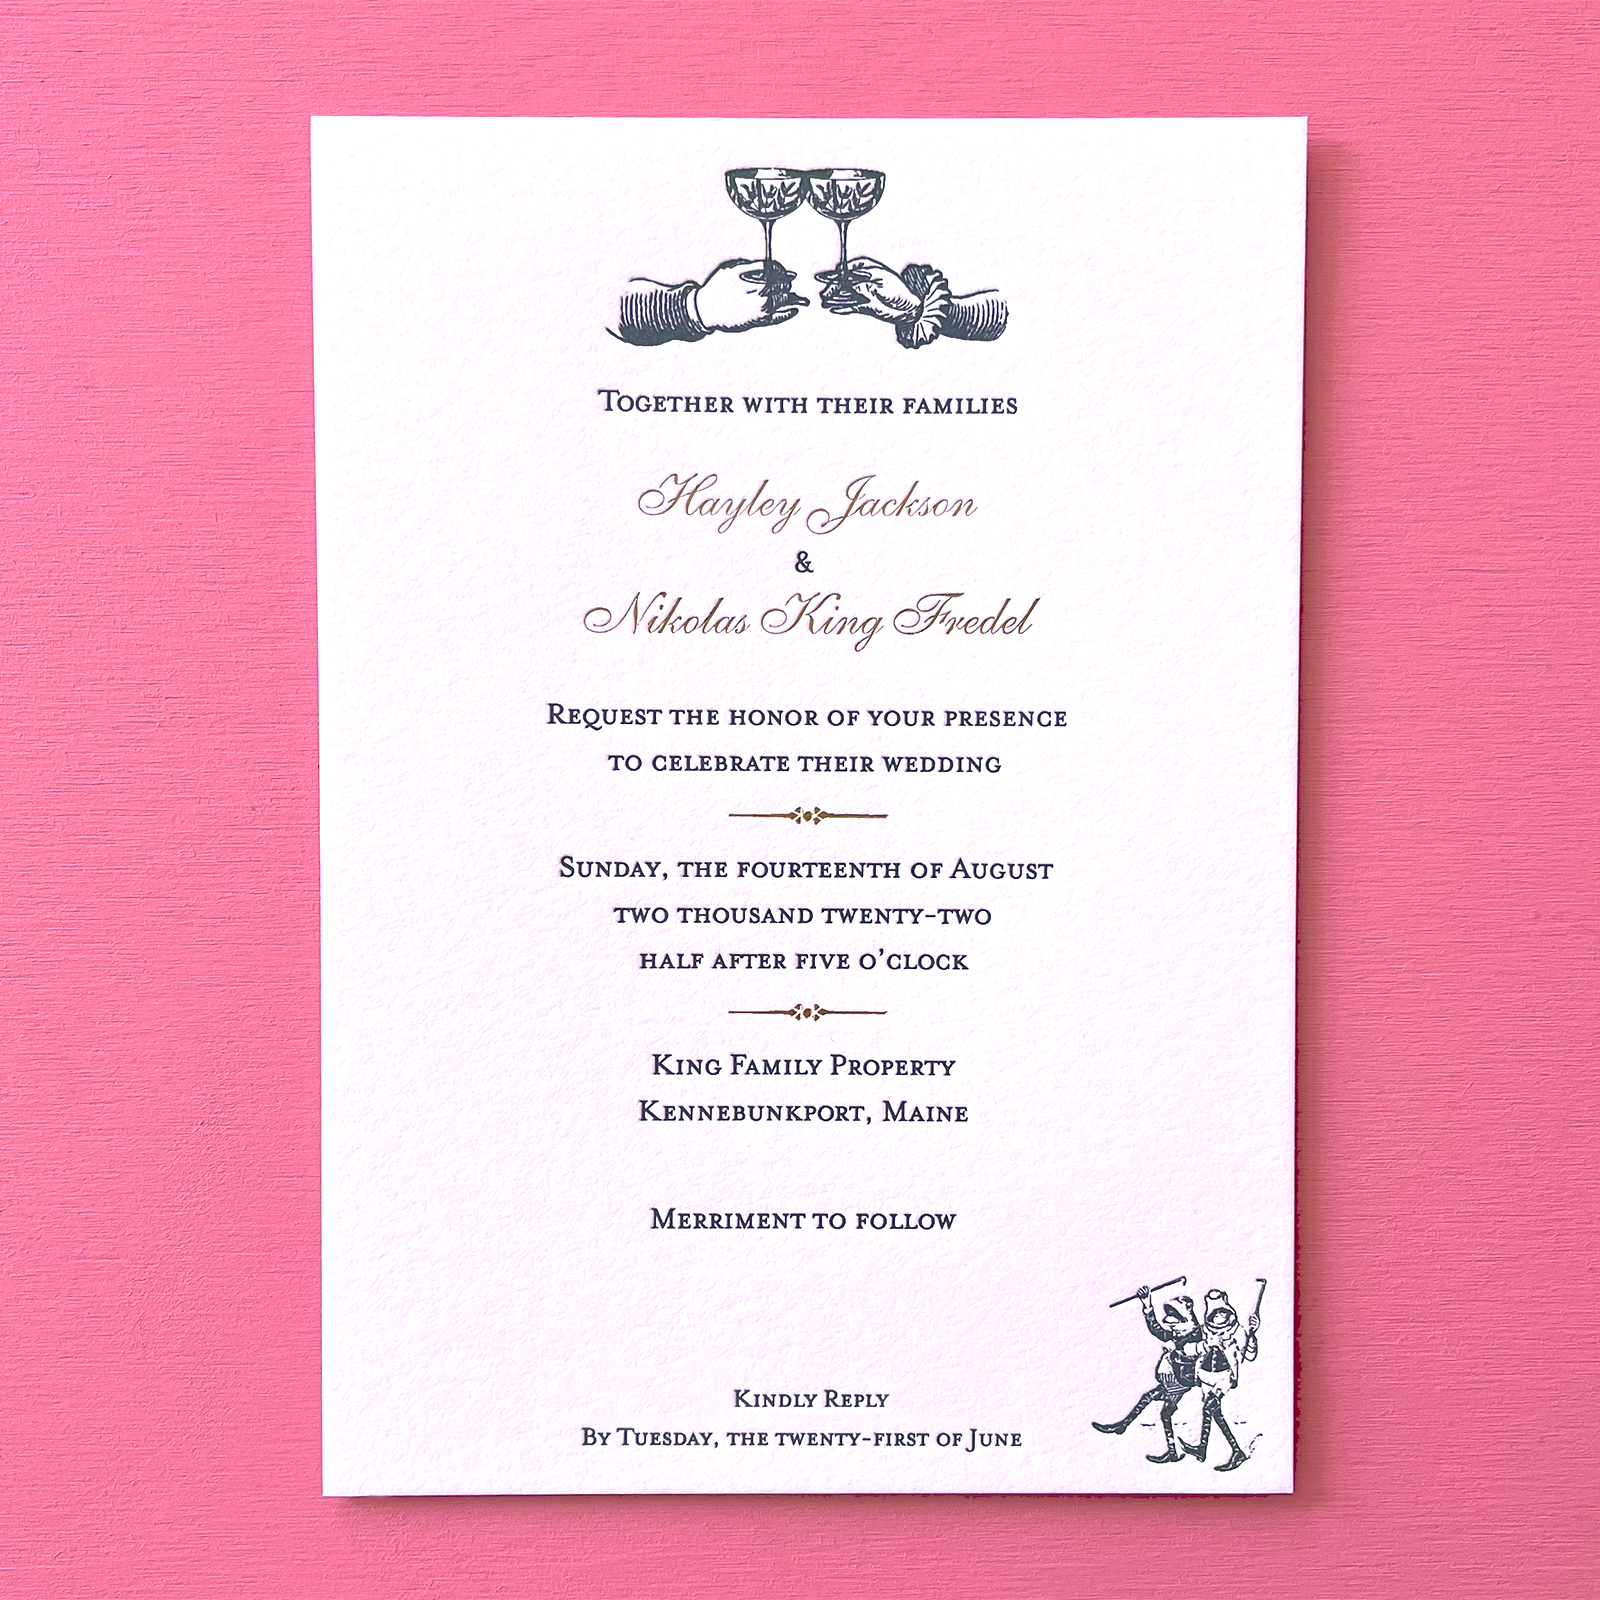 A stunning letterpress wedding invitation with intricate design details. Gold foil accents shimmer elegantly alongside rich ink printing, creating a luxurious and timeless look.